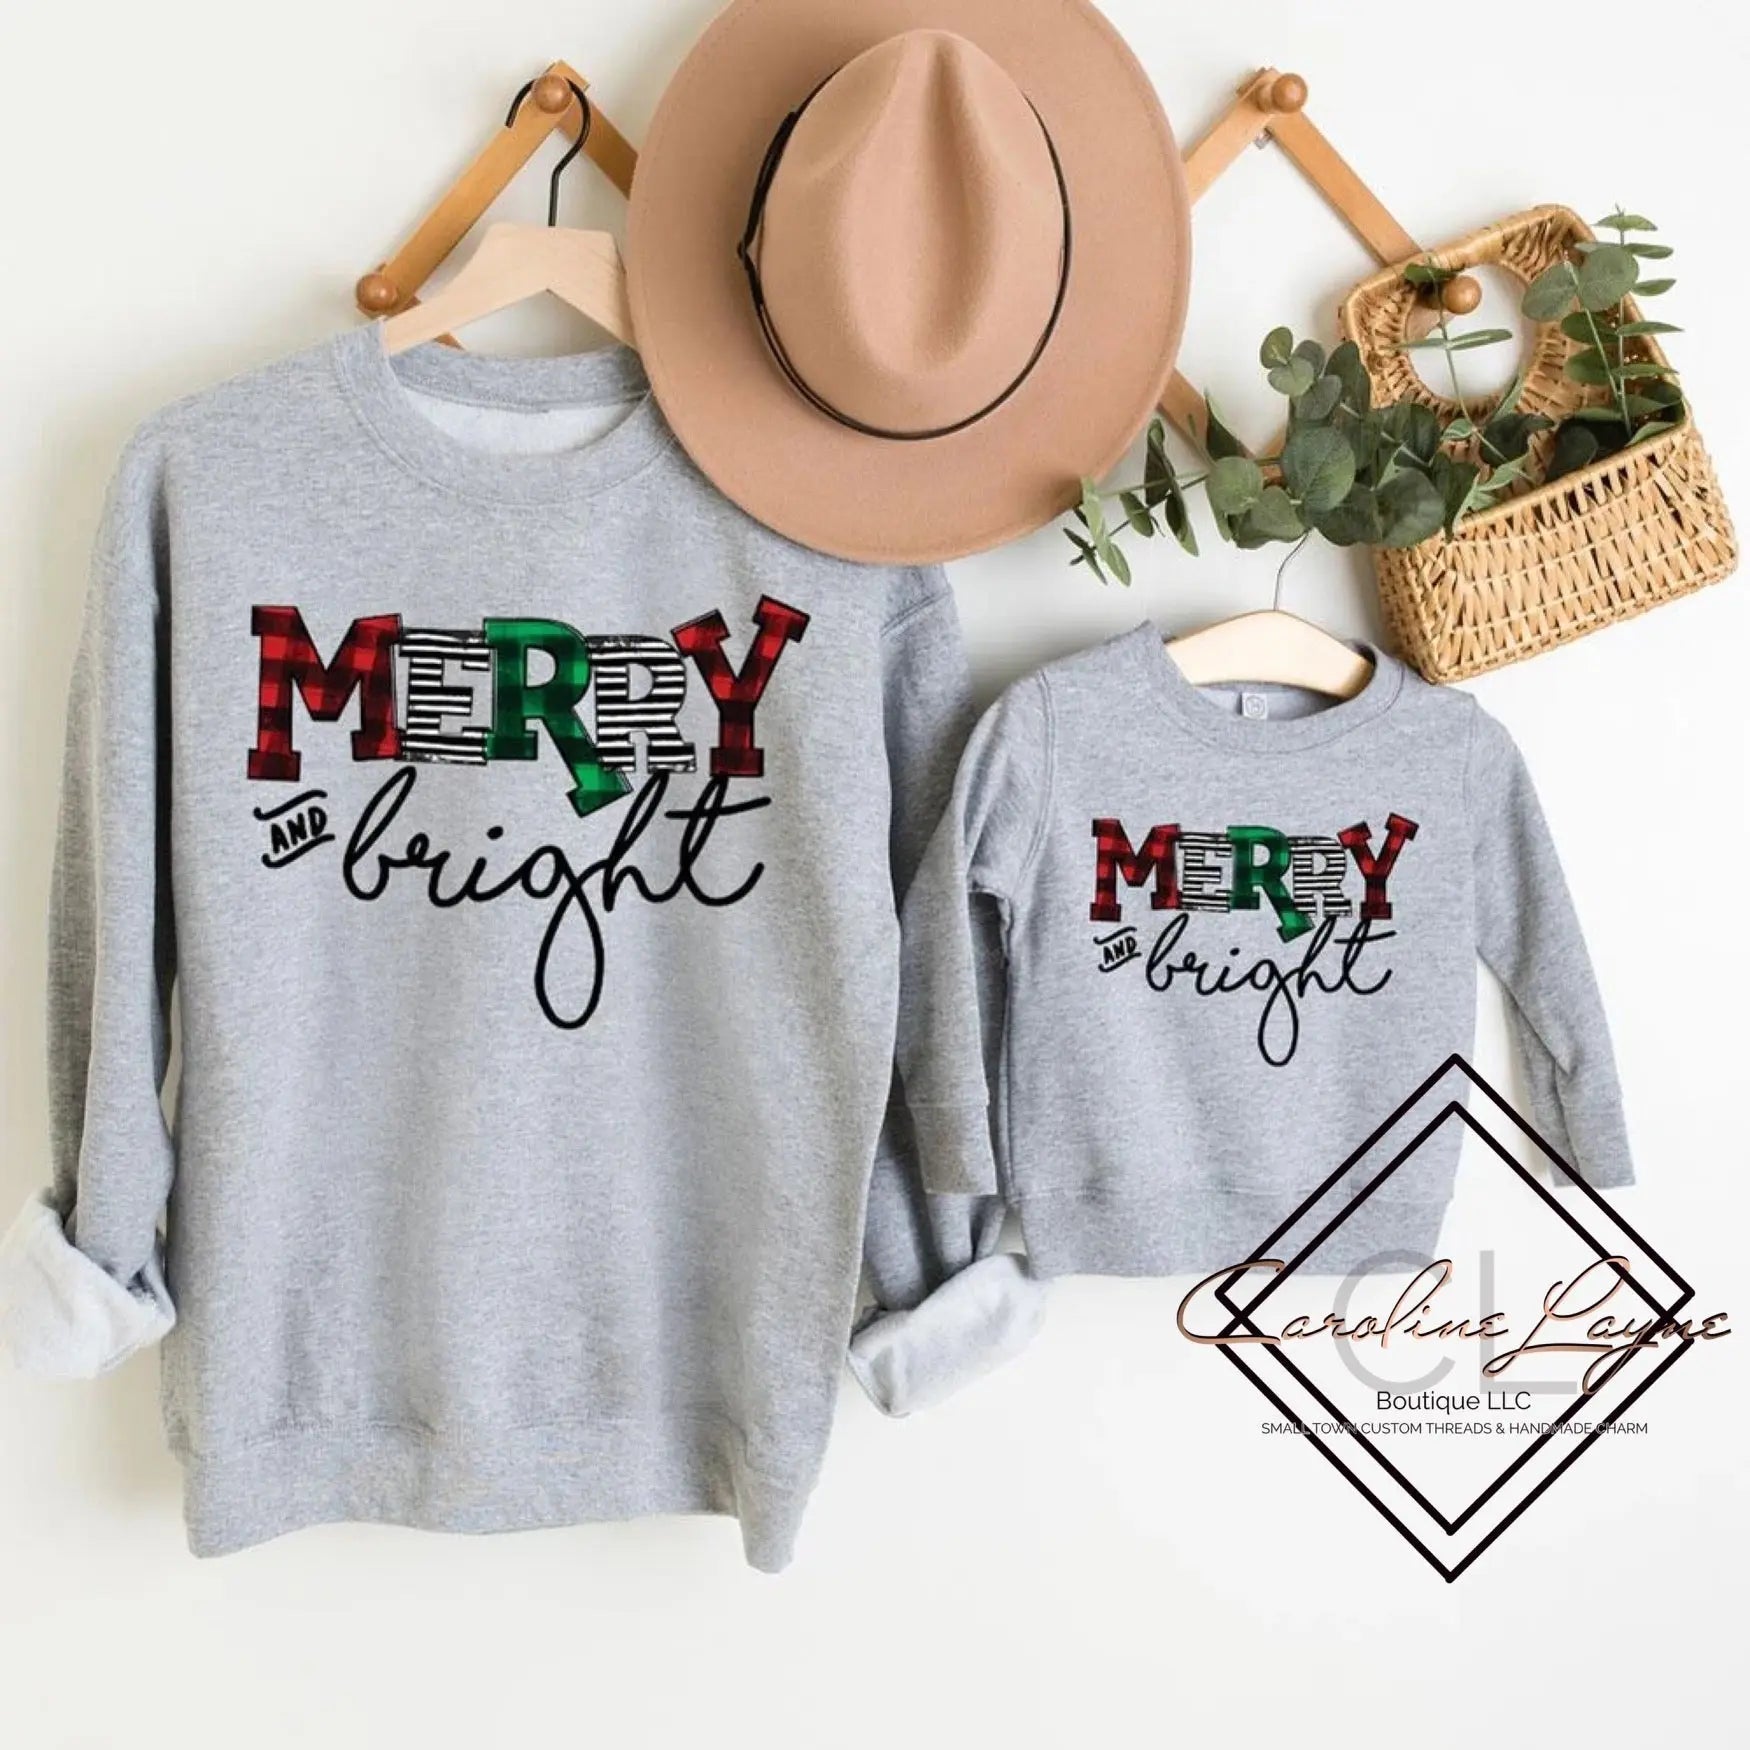 Merry And Bright Mommy And Me Sweatshirt - Caroline Layne Boutique LLC